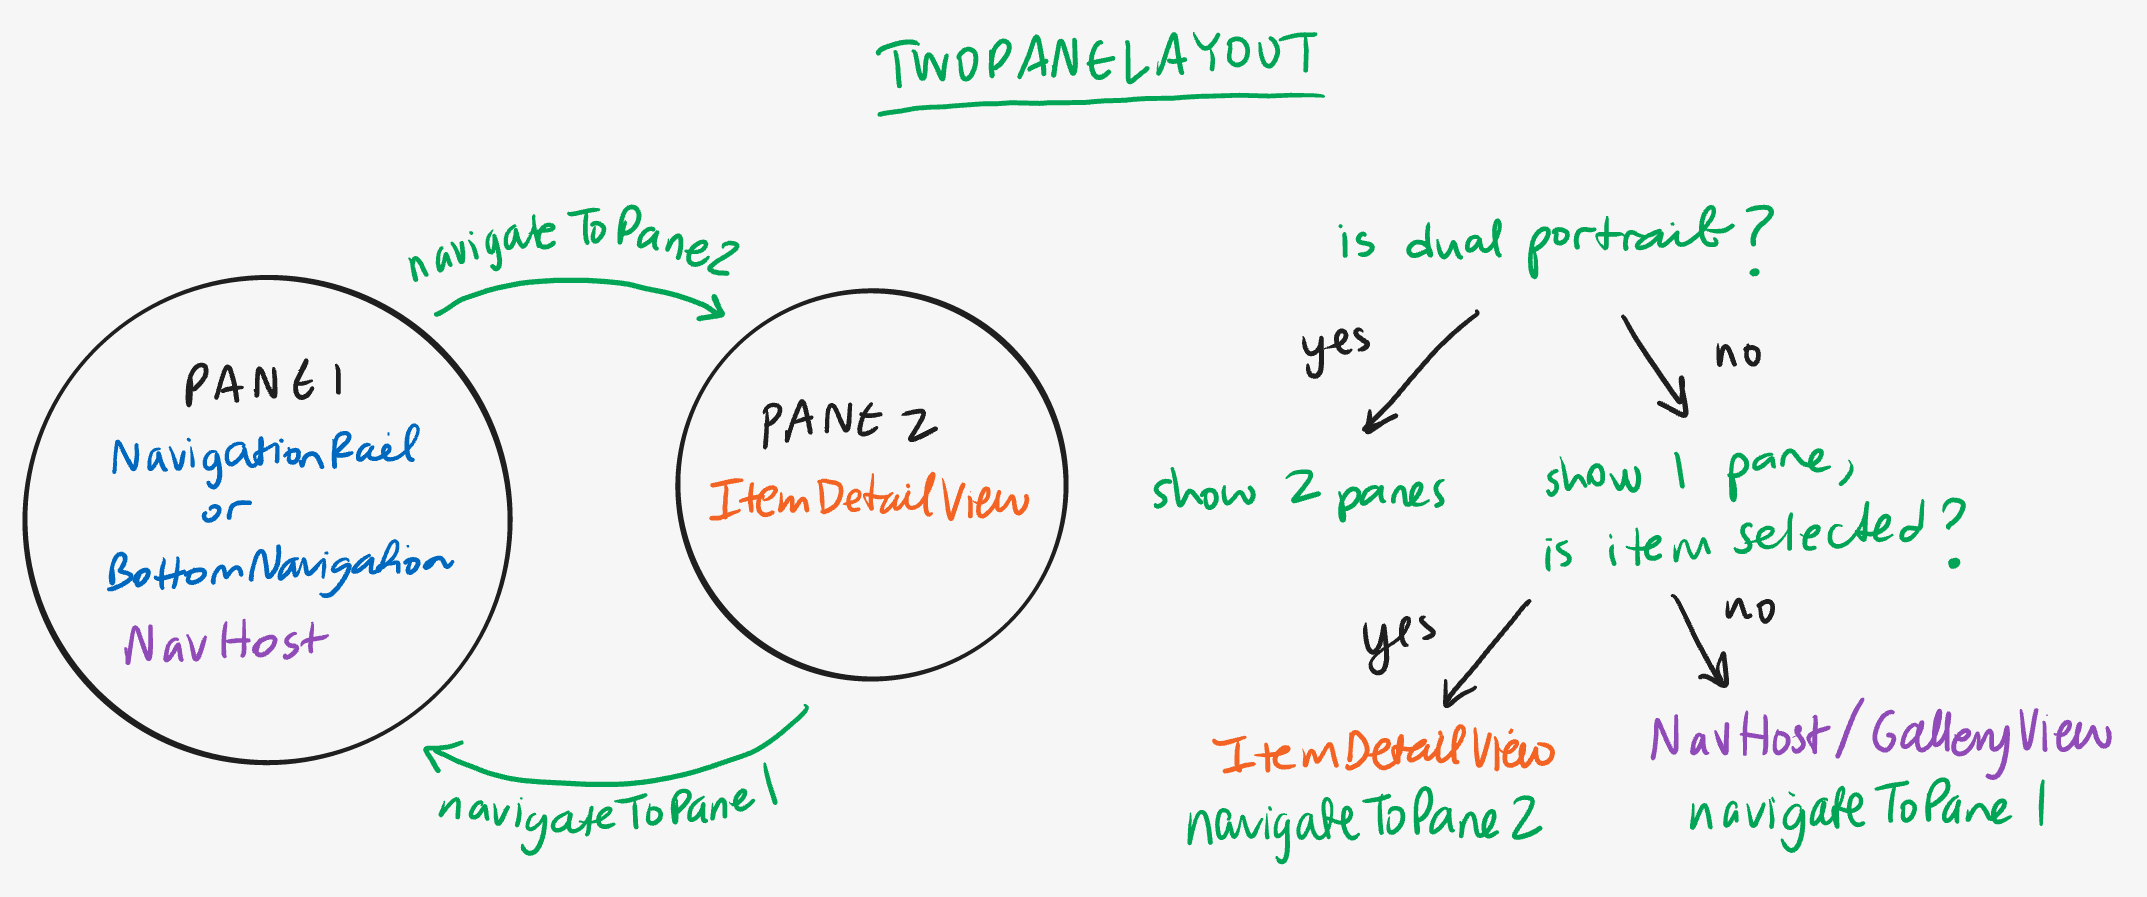 TwoPaneLayout navigation diagram; Pane 1 holds navigation rail/bottom navigation and NavHost, Pane 2 holds ItemDetailView, can use navigateToPane2 and navigateToPane1 methods to switch between; Logic flow: if dual portrait, show 2 panes; if not, check if item is selected. If item is selected, show ItemDetailView via navigateToPane2; if not, show NavHost/GalleryView via navigateToPane1